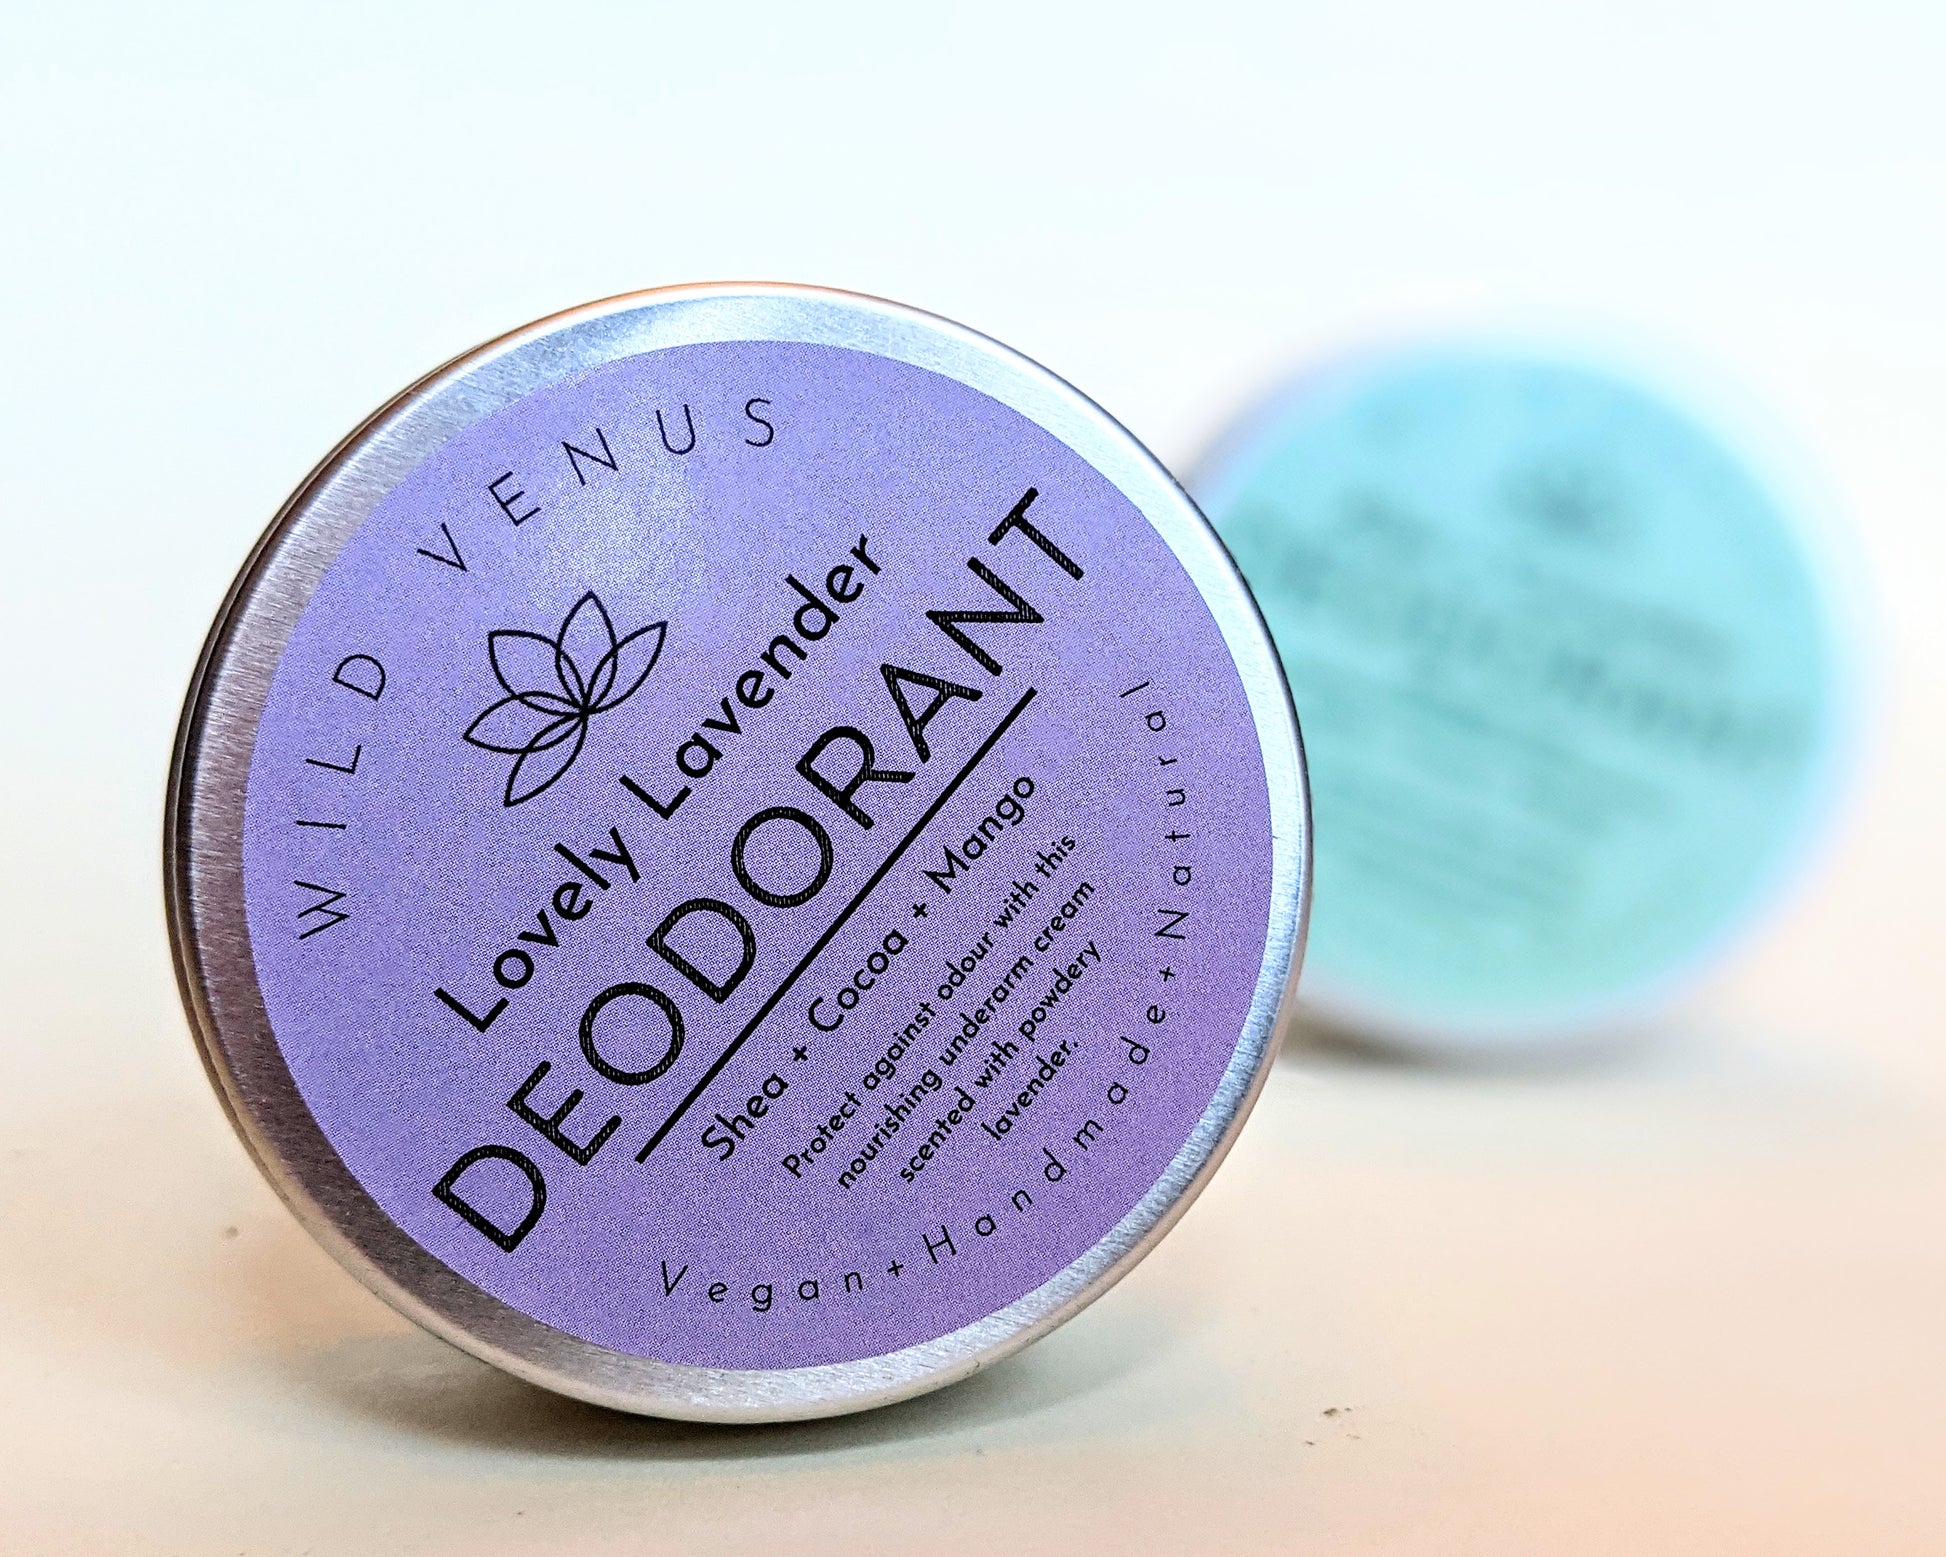 Lovely Lavender Deodorant in front of the aloe and cucumber deodorant. 